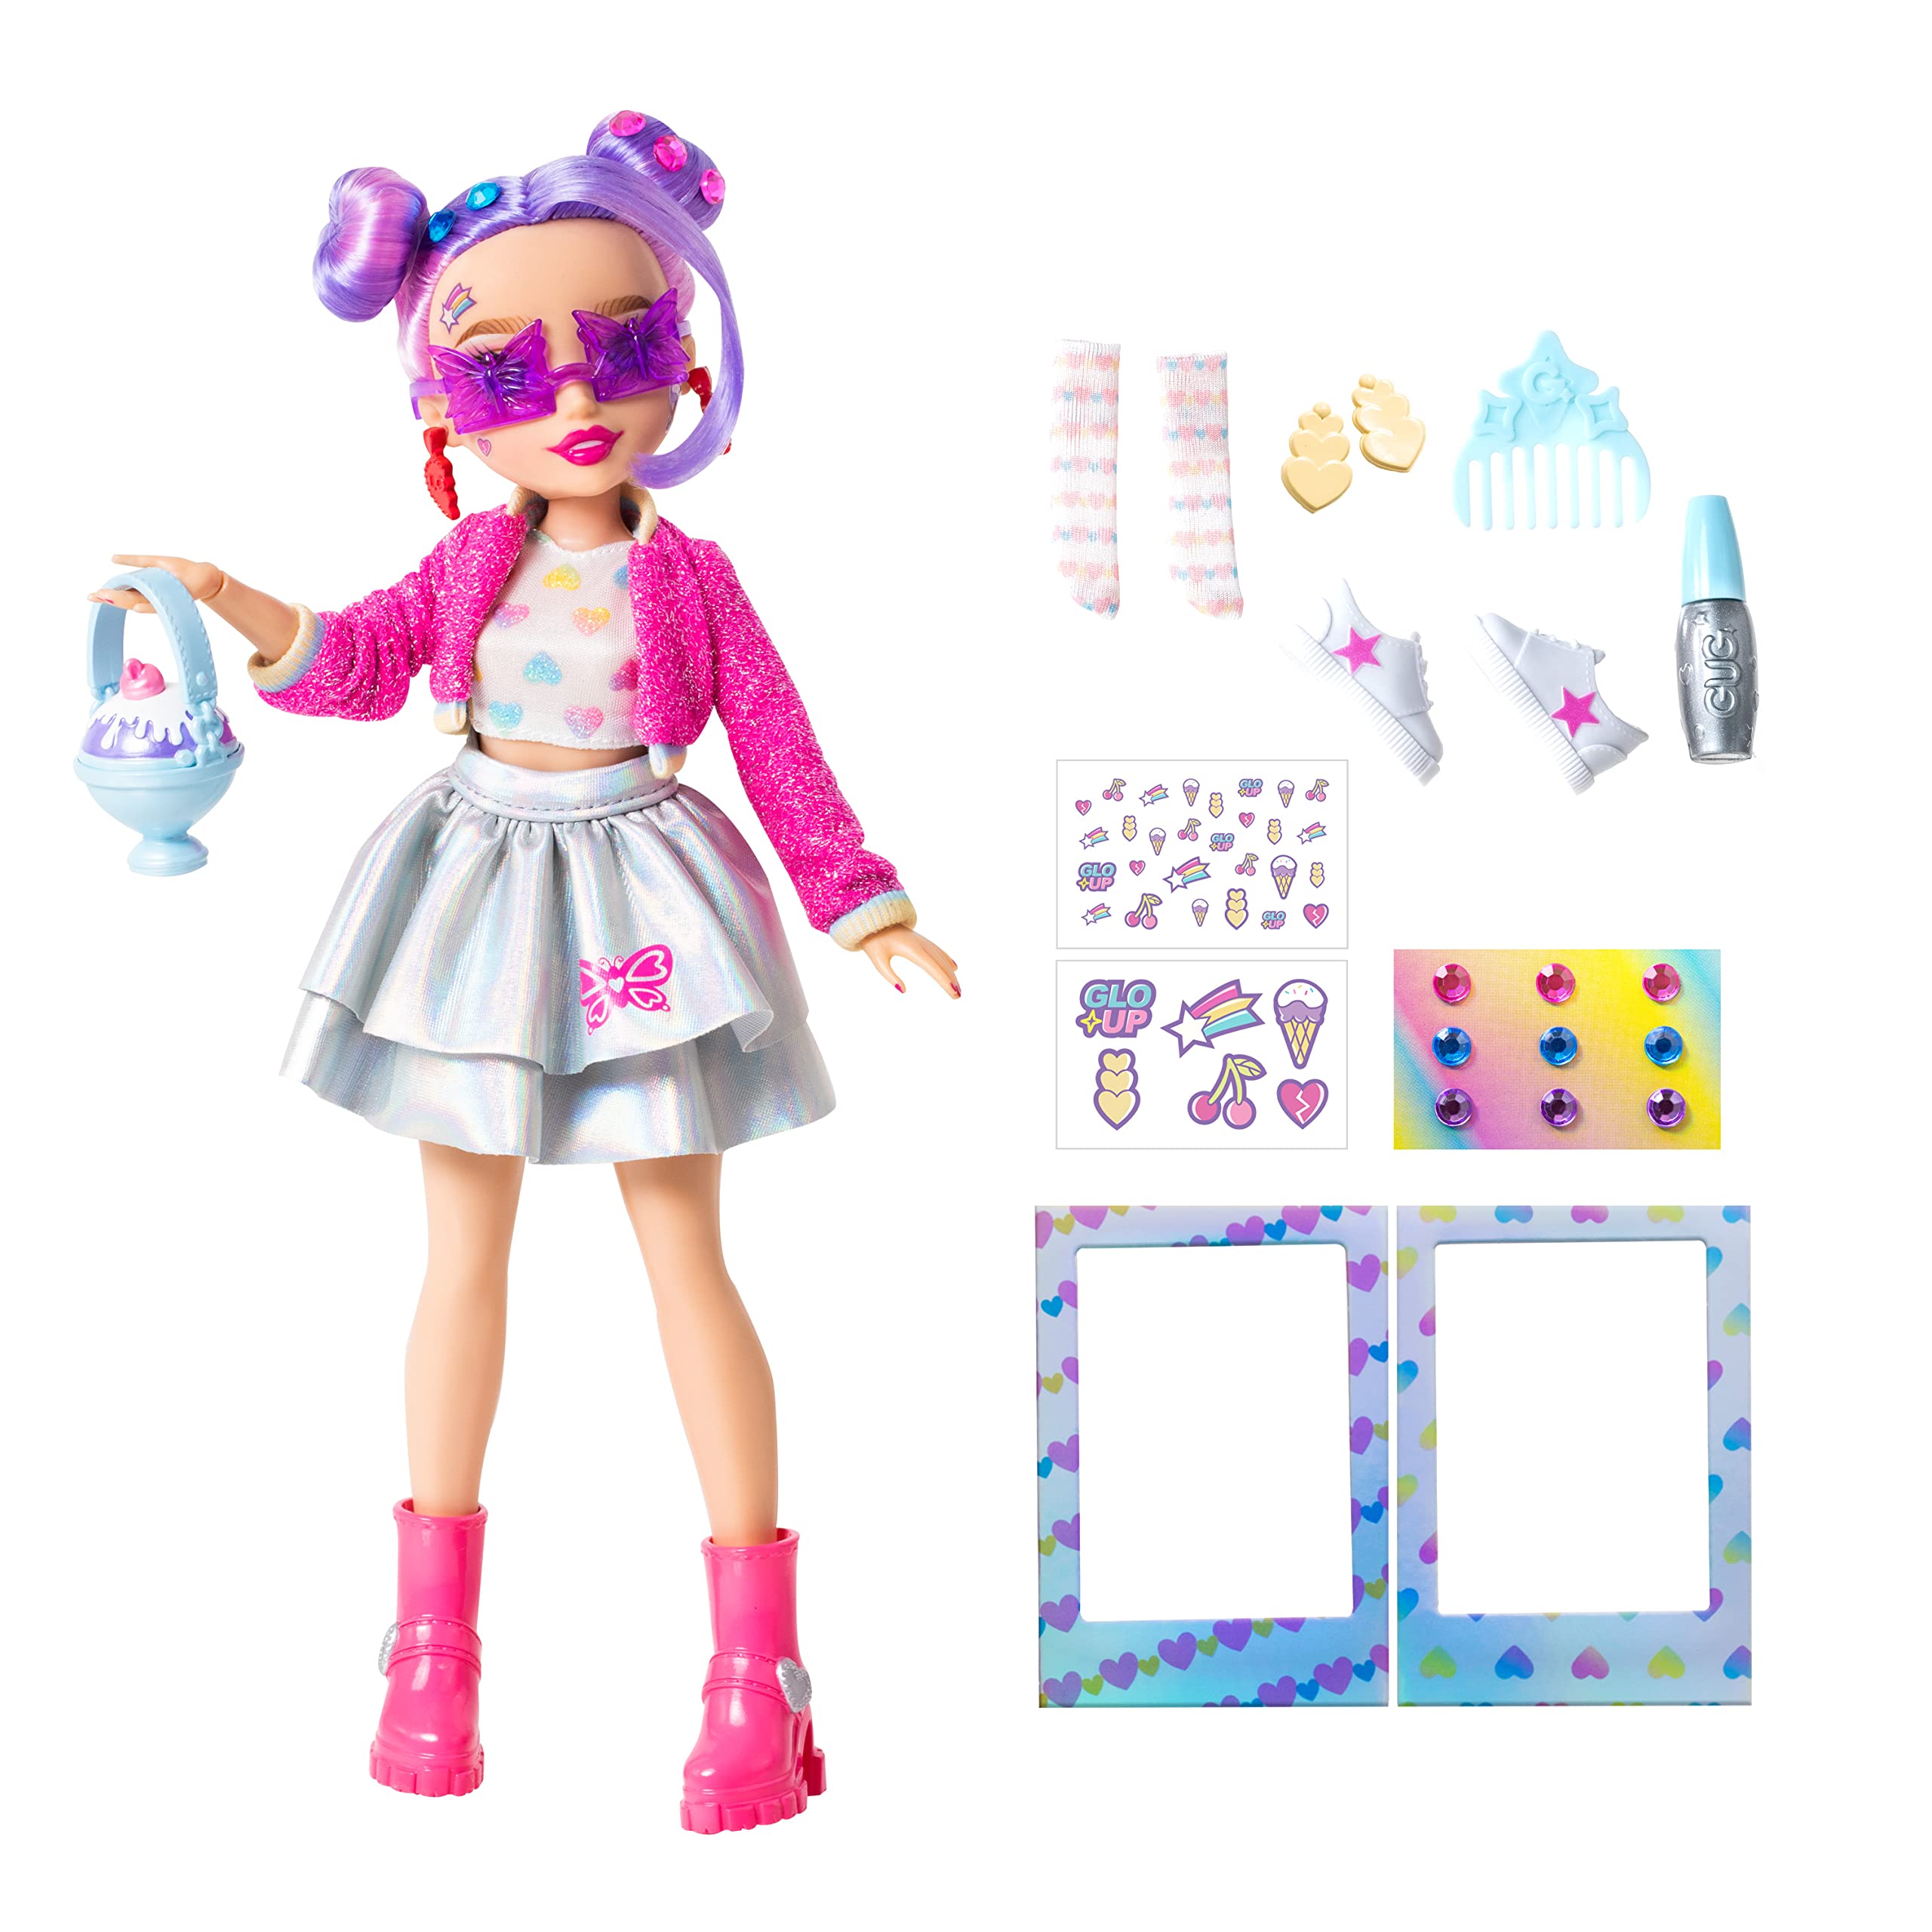 Far Out Toys GLO-UP Girls Season 2 Sadie Fashionista Fashion Doll, Dazzling Jewelry, Hair Gems, Accessories, Fashions, Face Stickers, Makeup, Nails